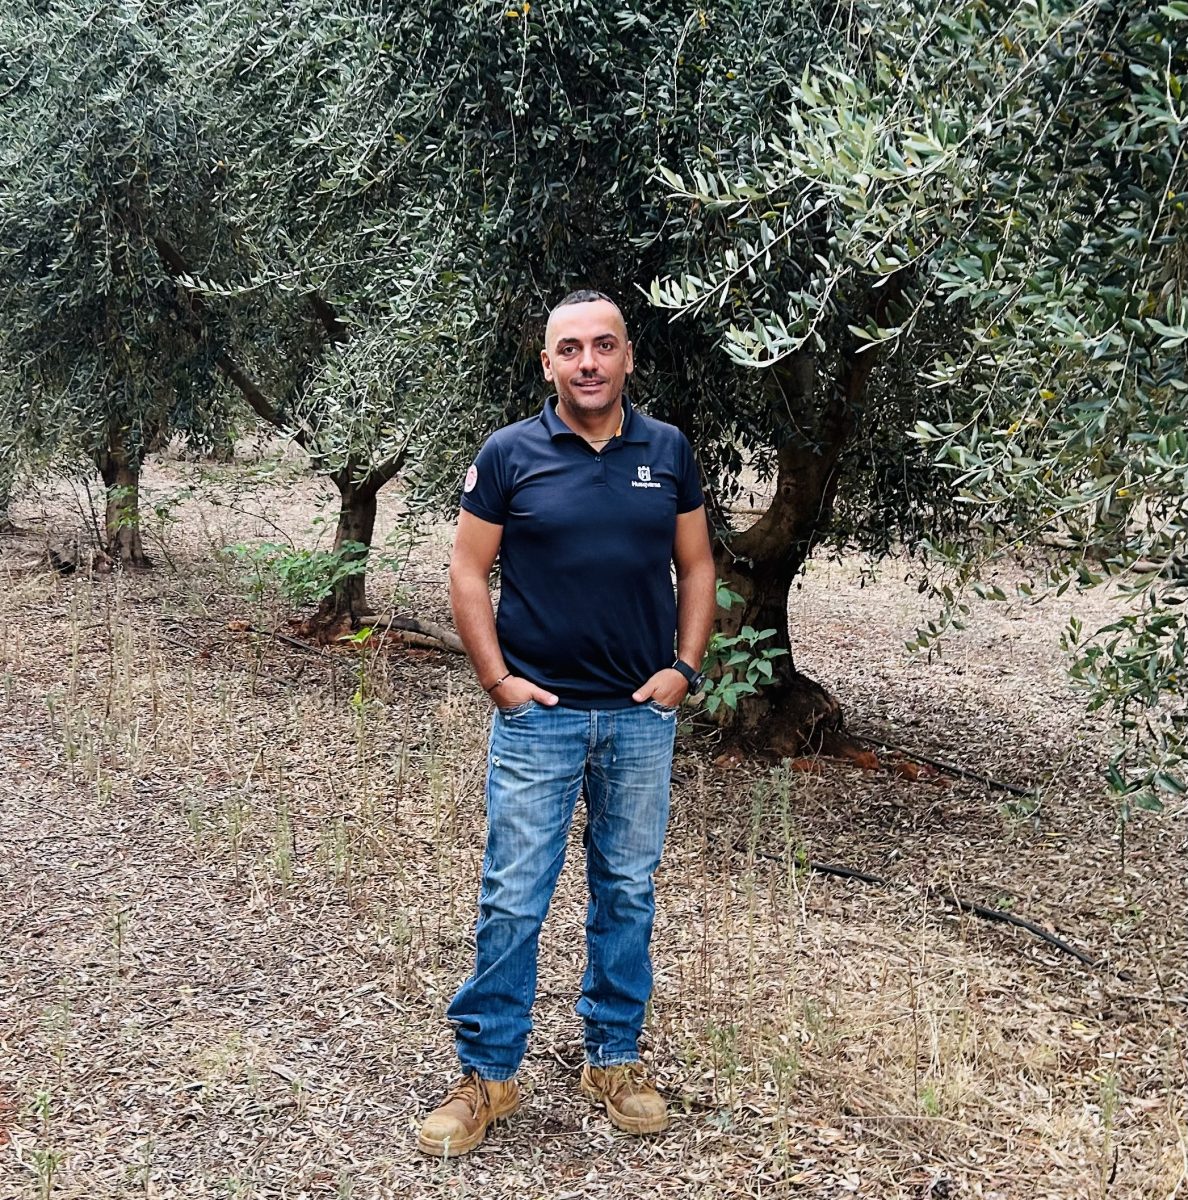 Dr Ruffolo in front of olive trees